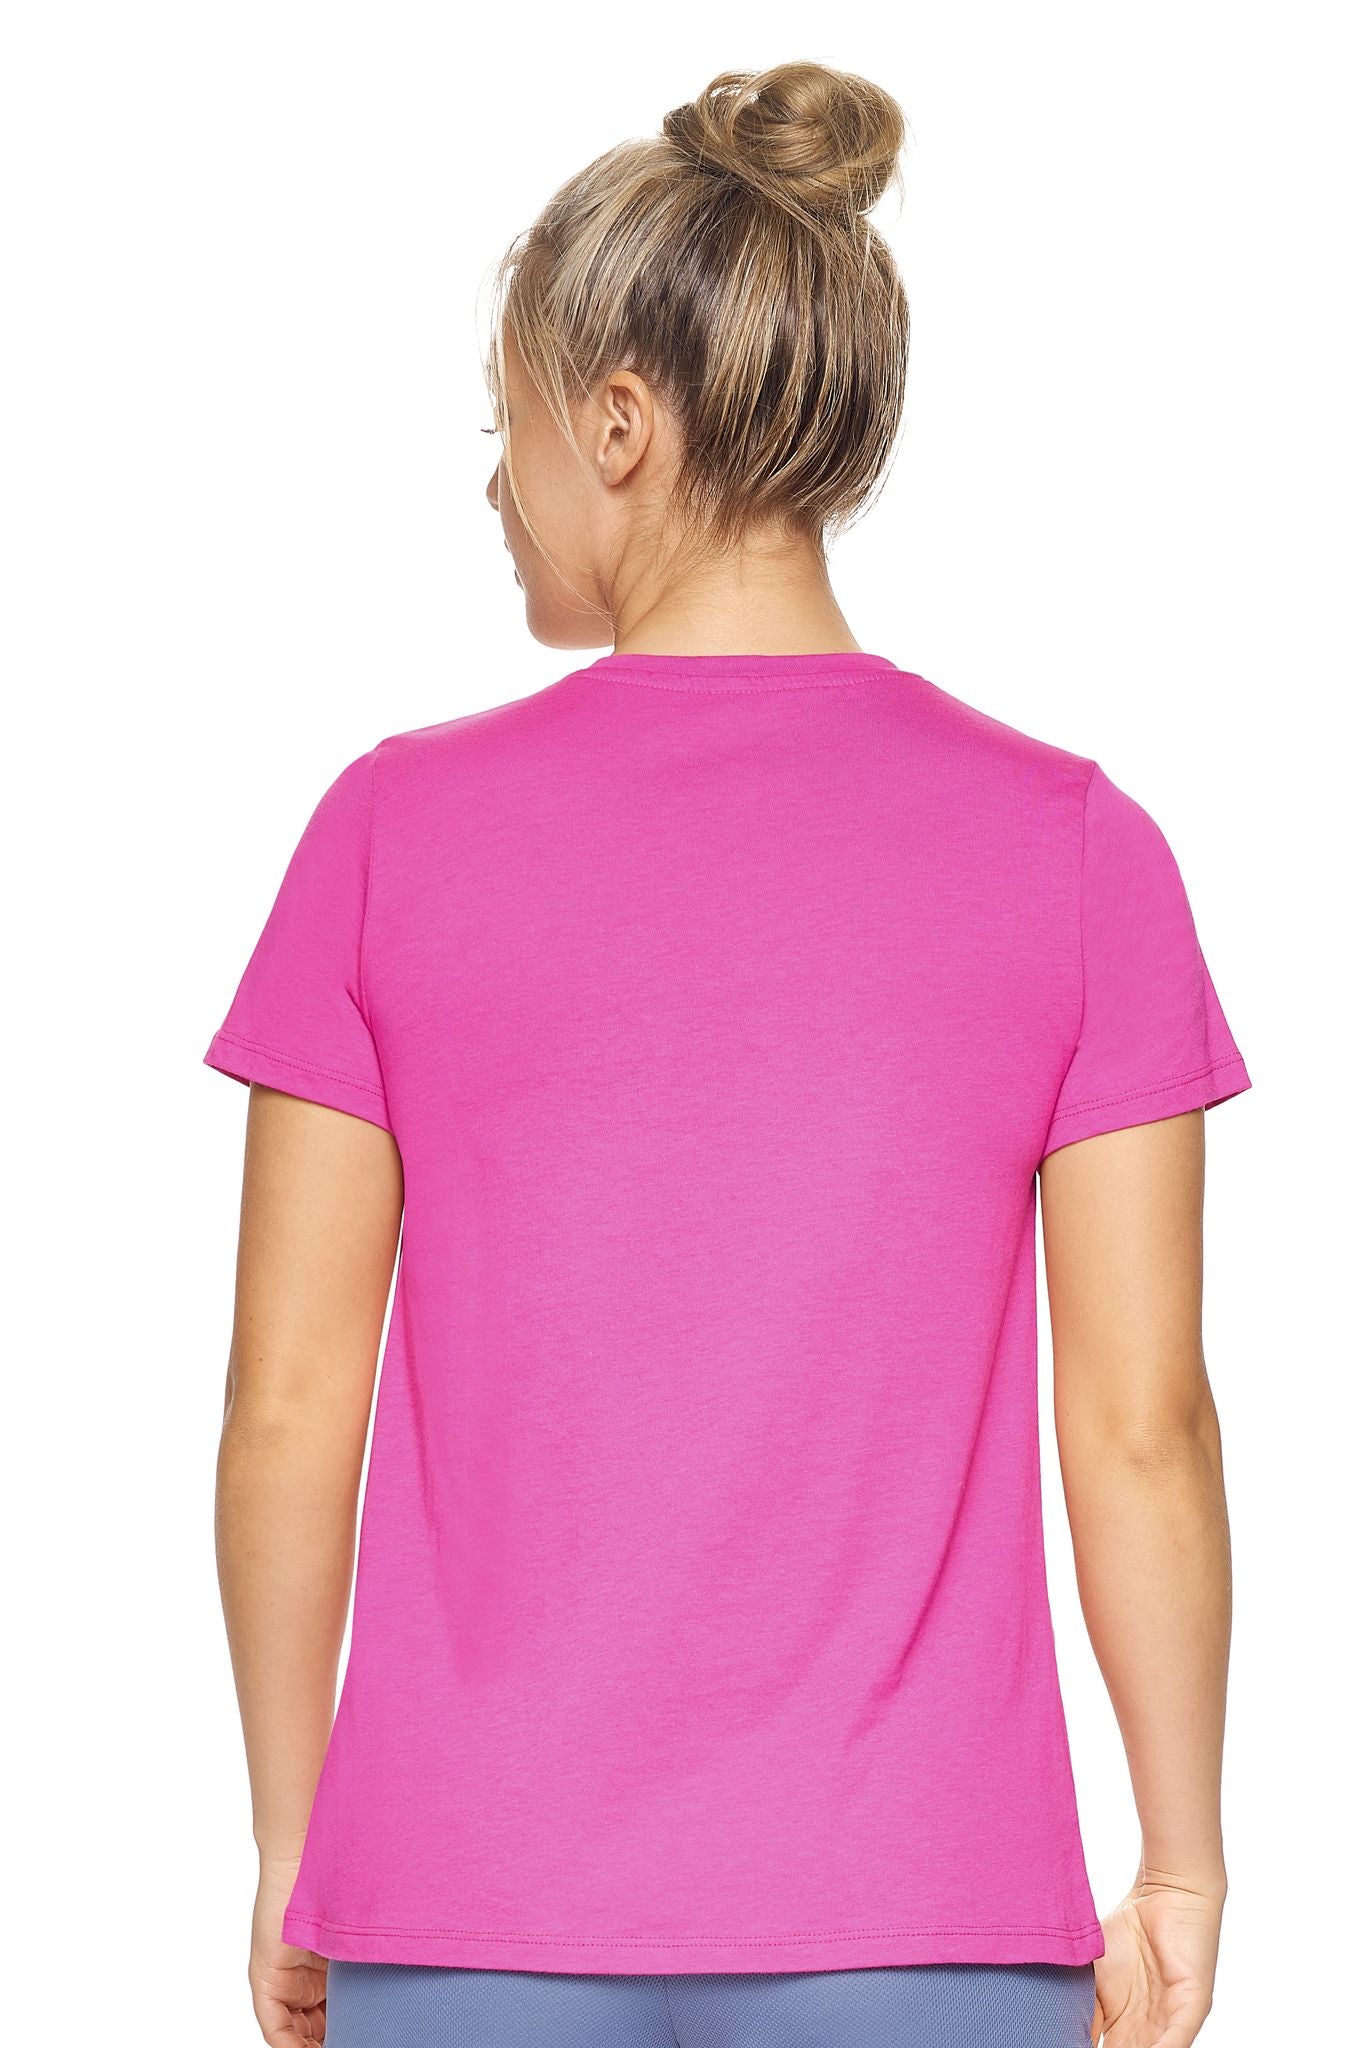 Expert Brand Retail Sustainable Eco-Friendly Micromodal Cotton Women's V-neck T-shirt Made in the USA berry 3#color_berry